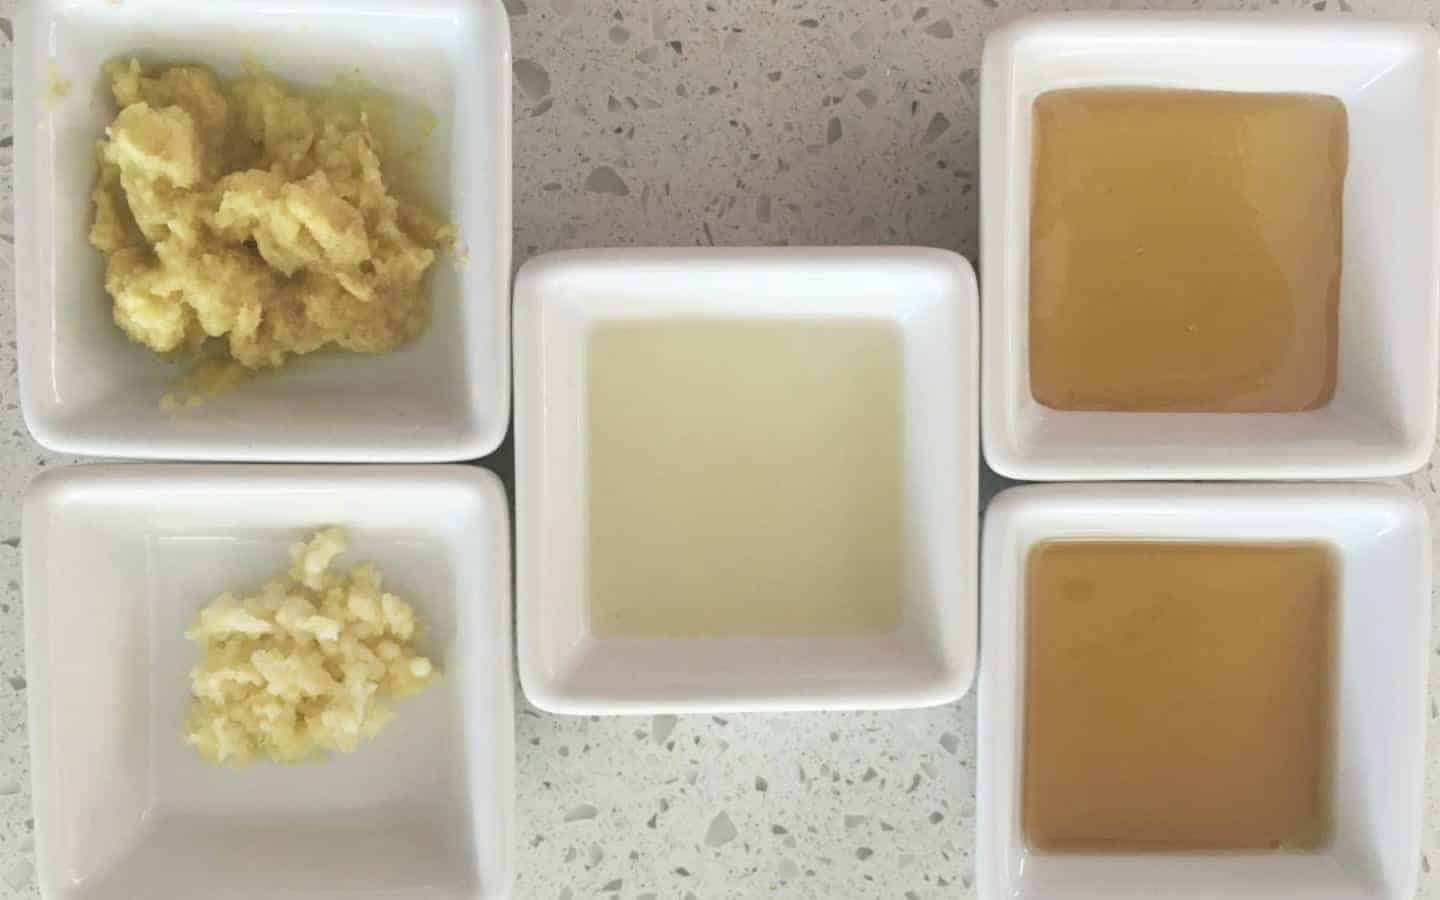 5 square bowls with ingredients such as oil, garlic and ginger